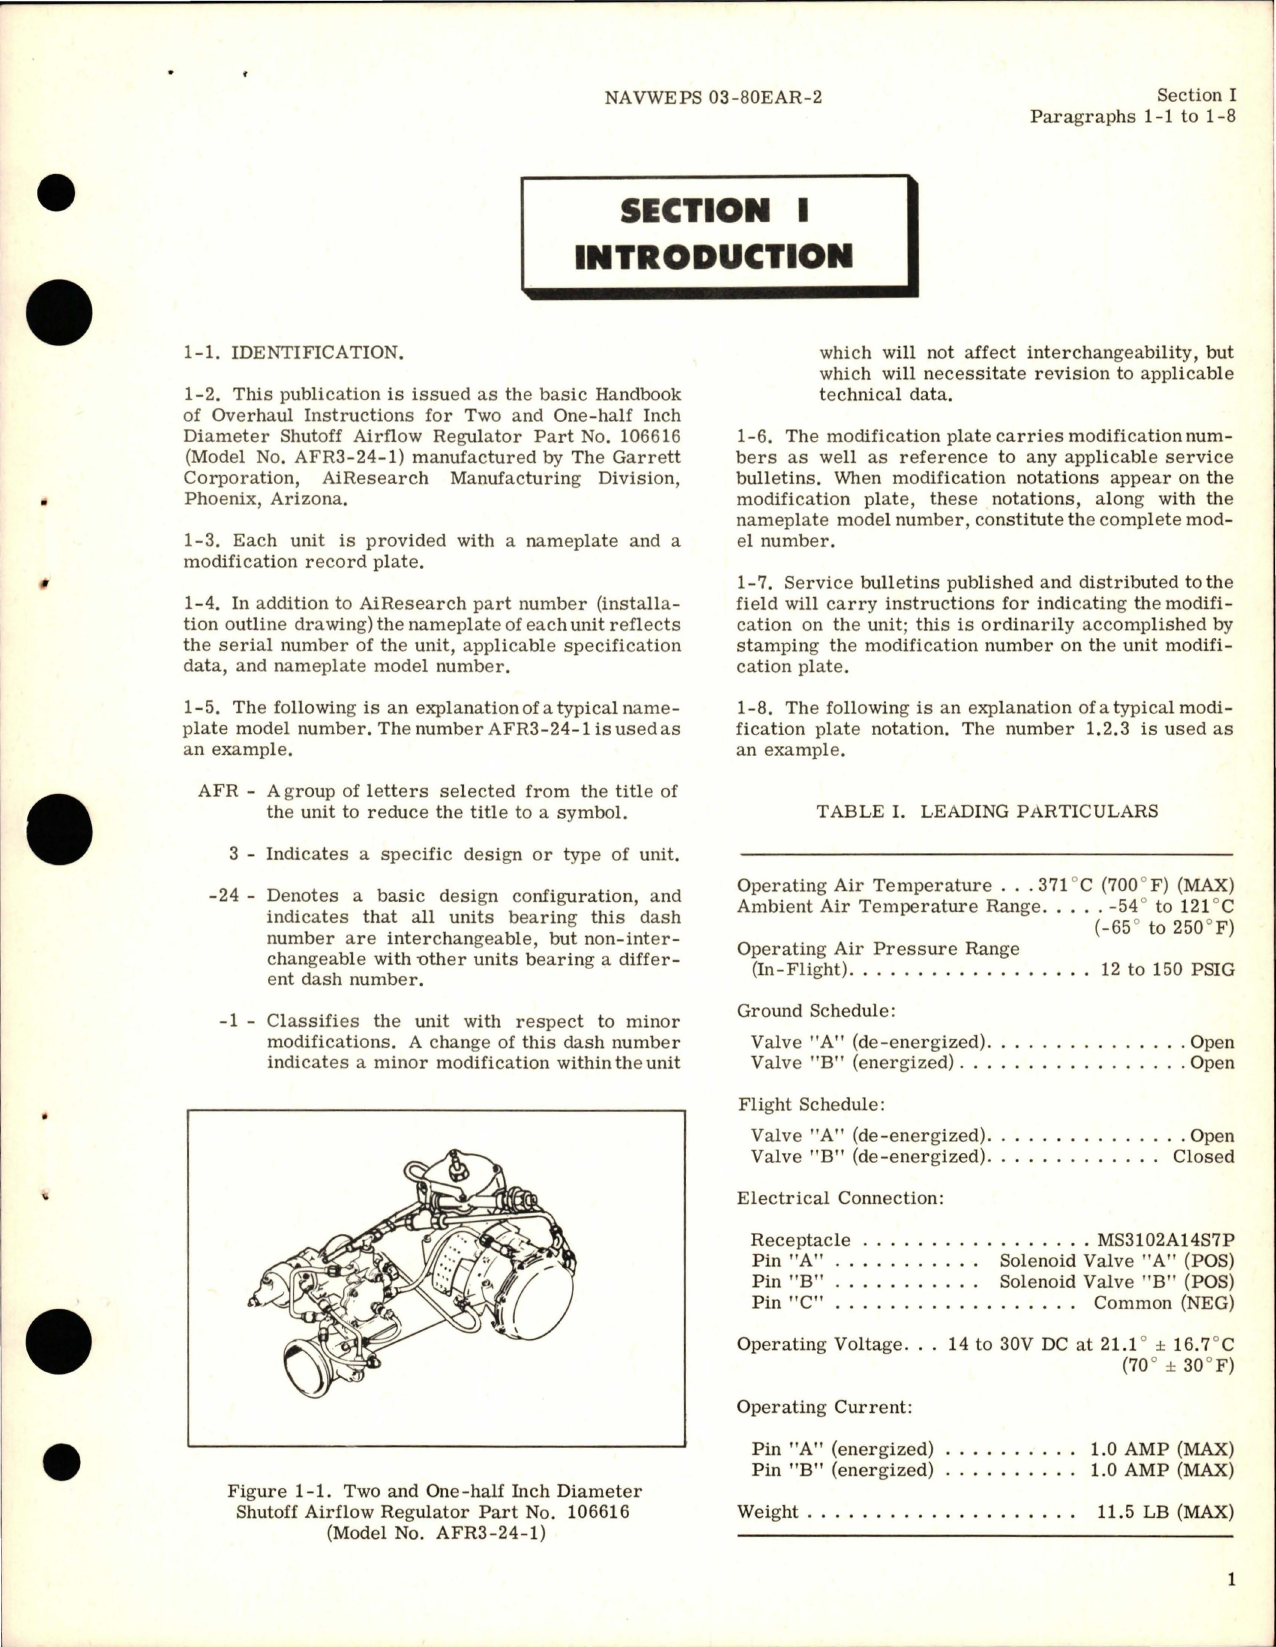 Sample page 5 from AirCorps Library document: Overhaul Instructions for Two and One-Half Inch Diameter Shutoff Airflow Regulator - Part 106616